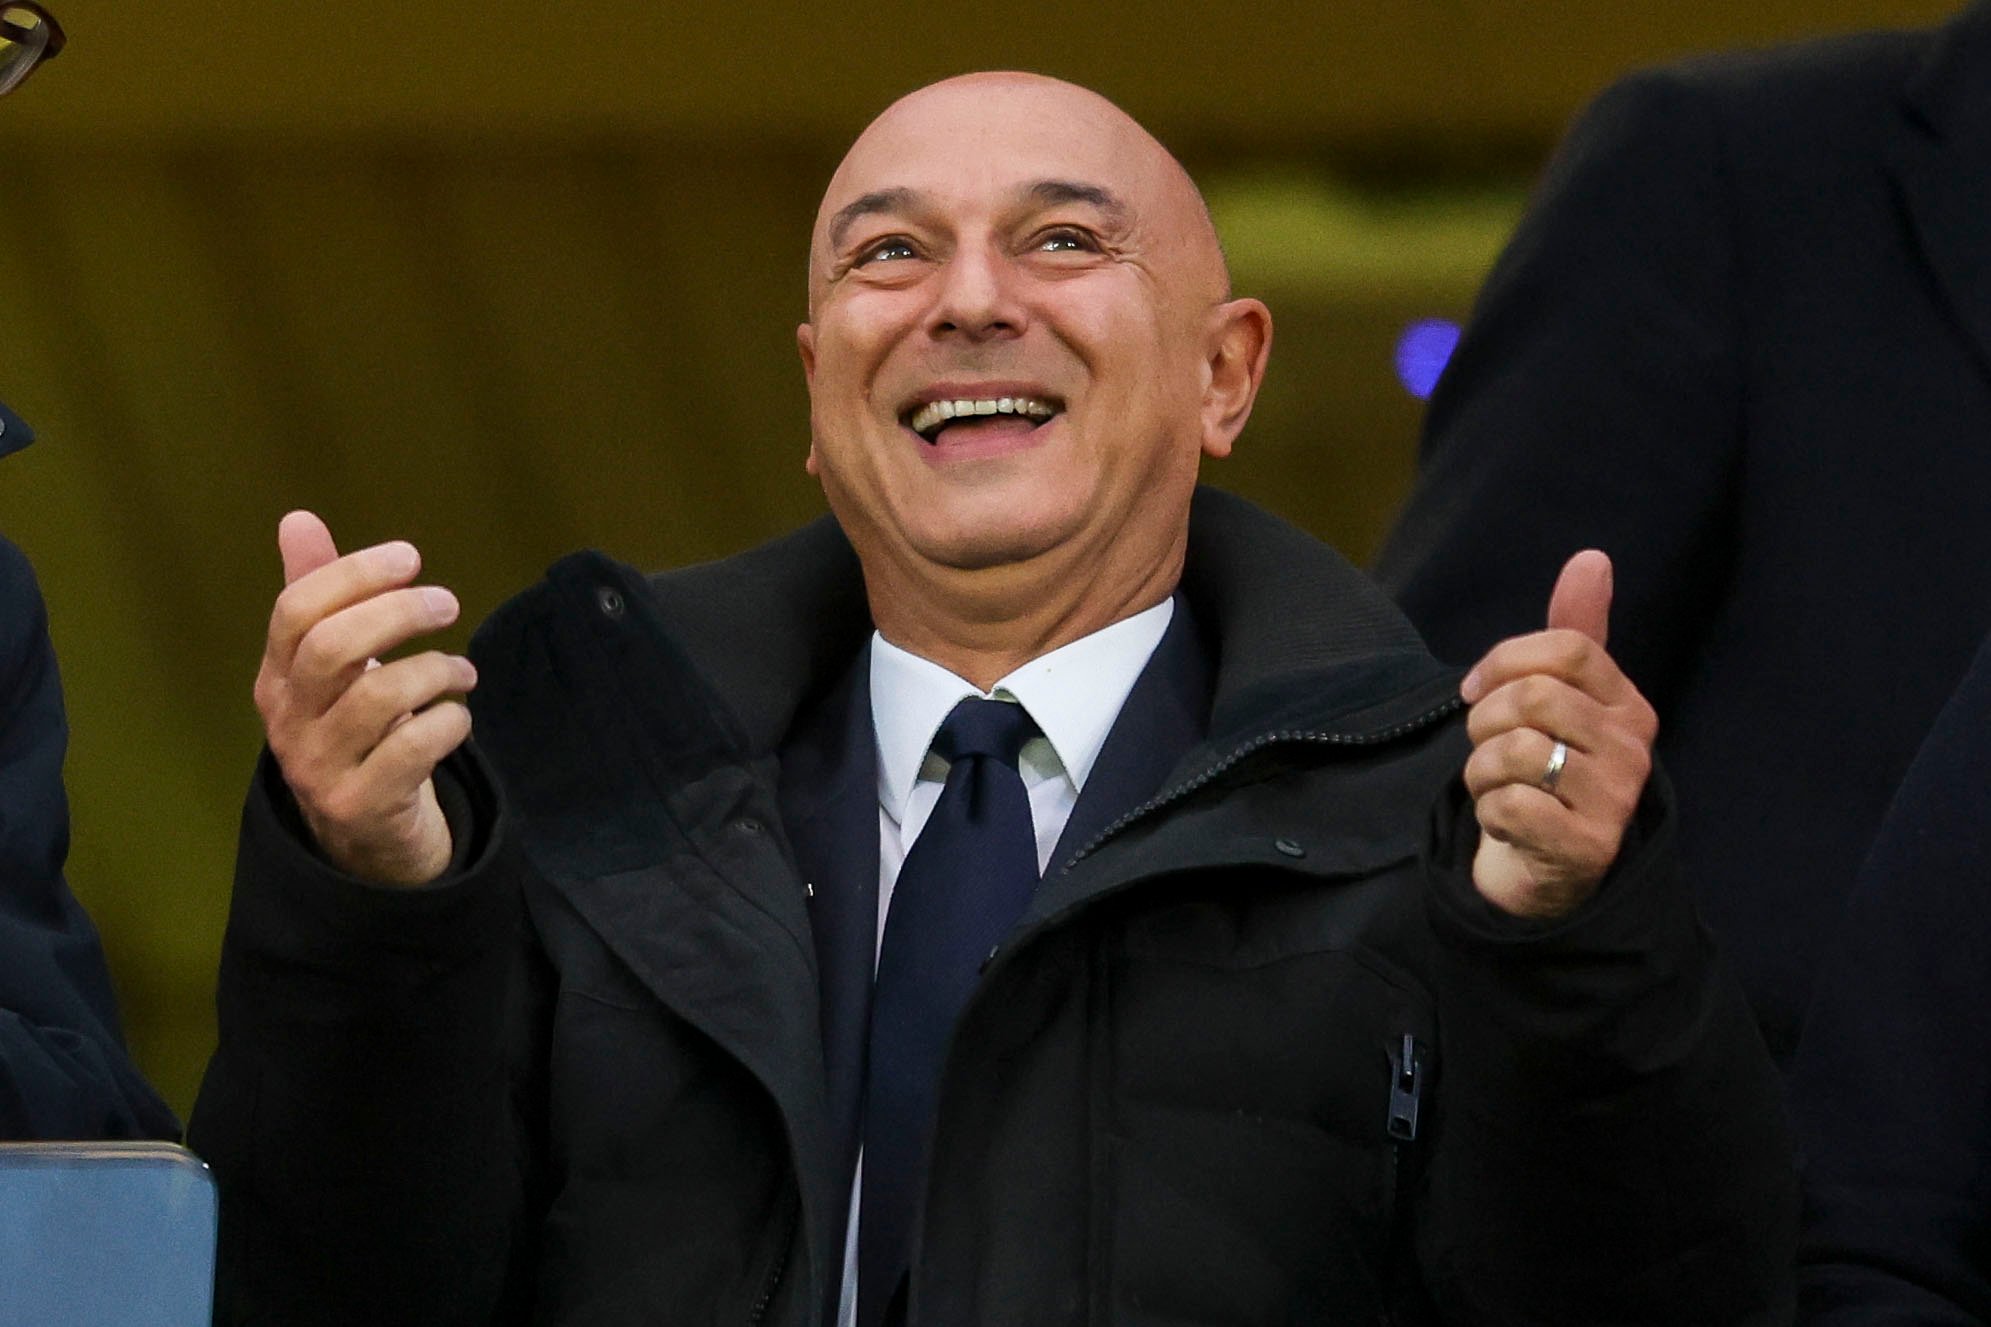 Spurs obsession with reported West Ham targets continues as Daniel Levy eyes move for highly-rated Spaniard Xabi Alonso